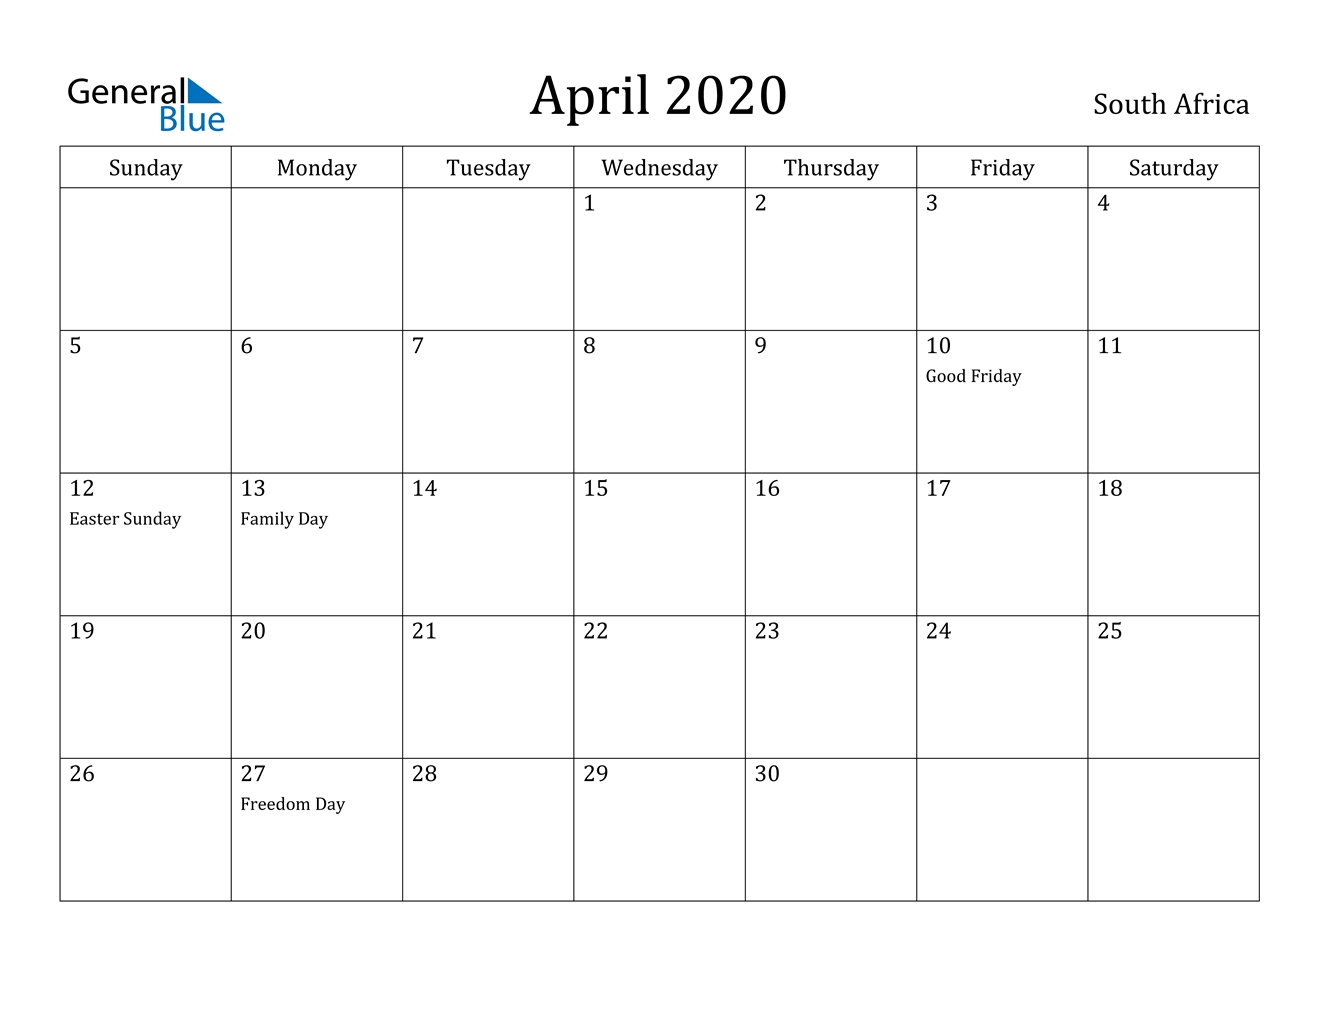 April 2020 Calendar - South Africa-April Holidays 2020 In South Africa